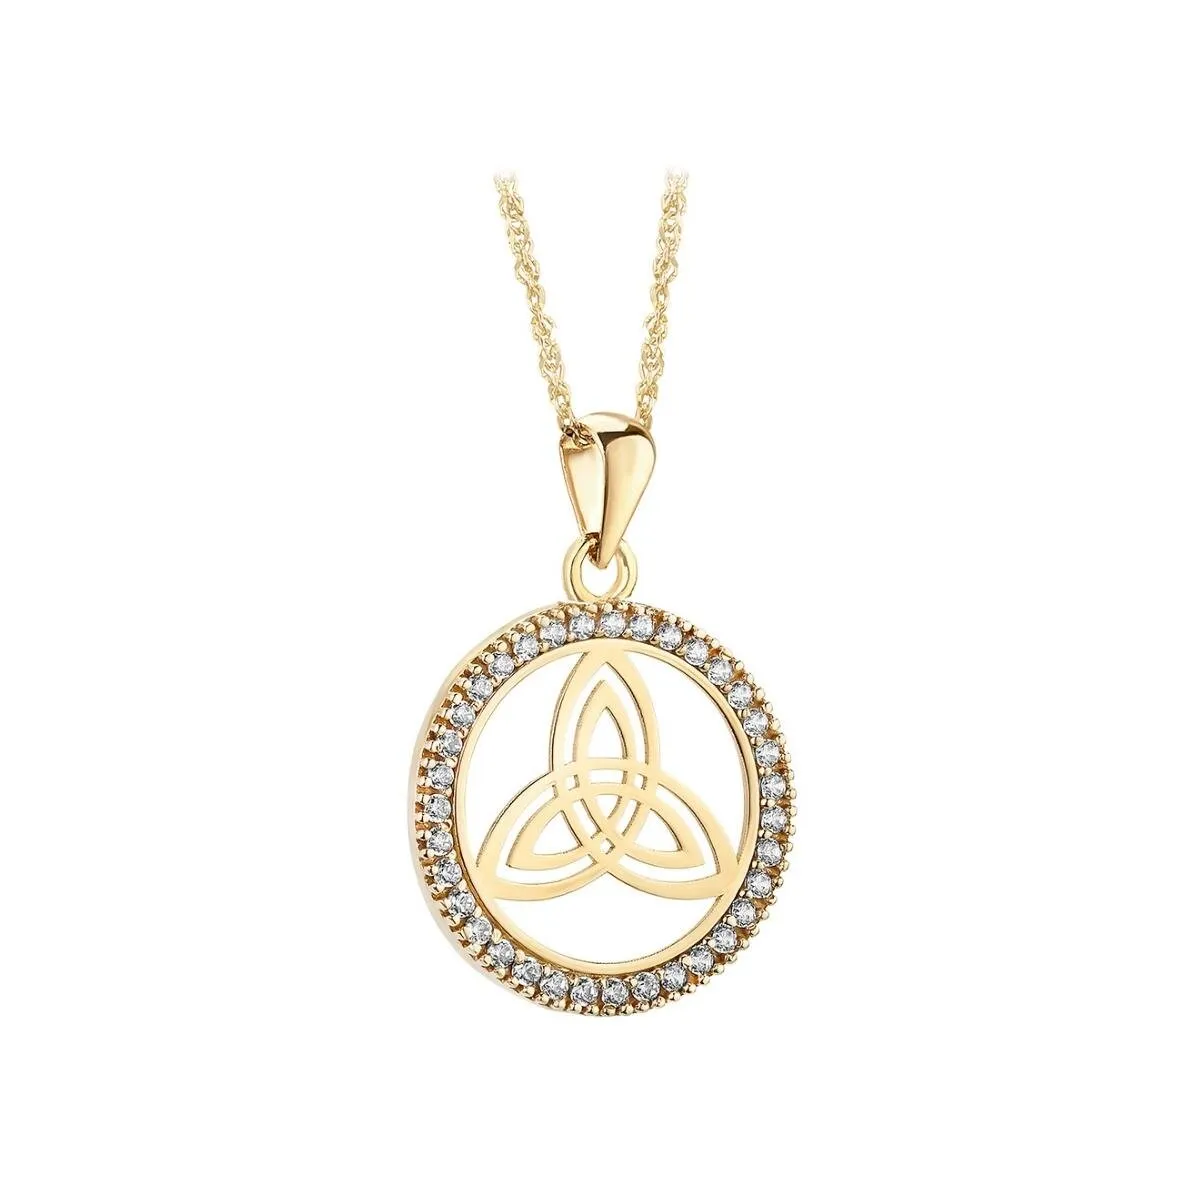 10k Gold Round Trinity Knot Necklace with Cubic Zirconia Stones...